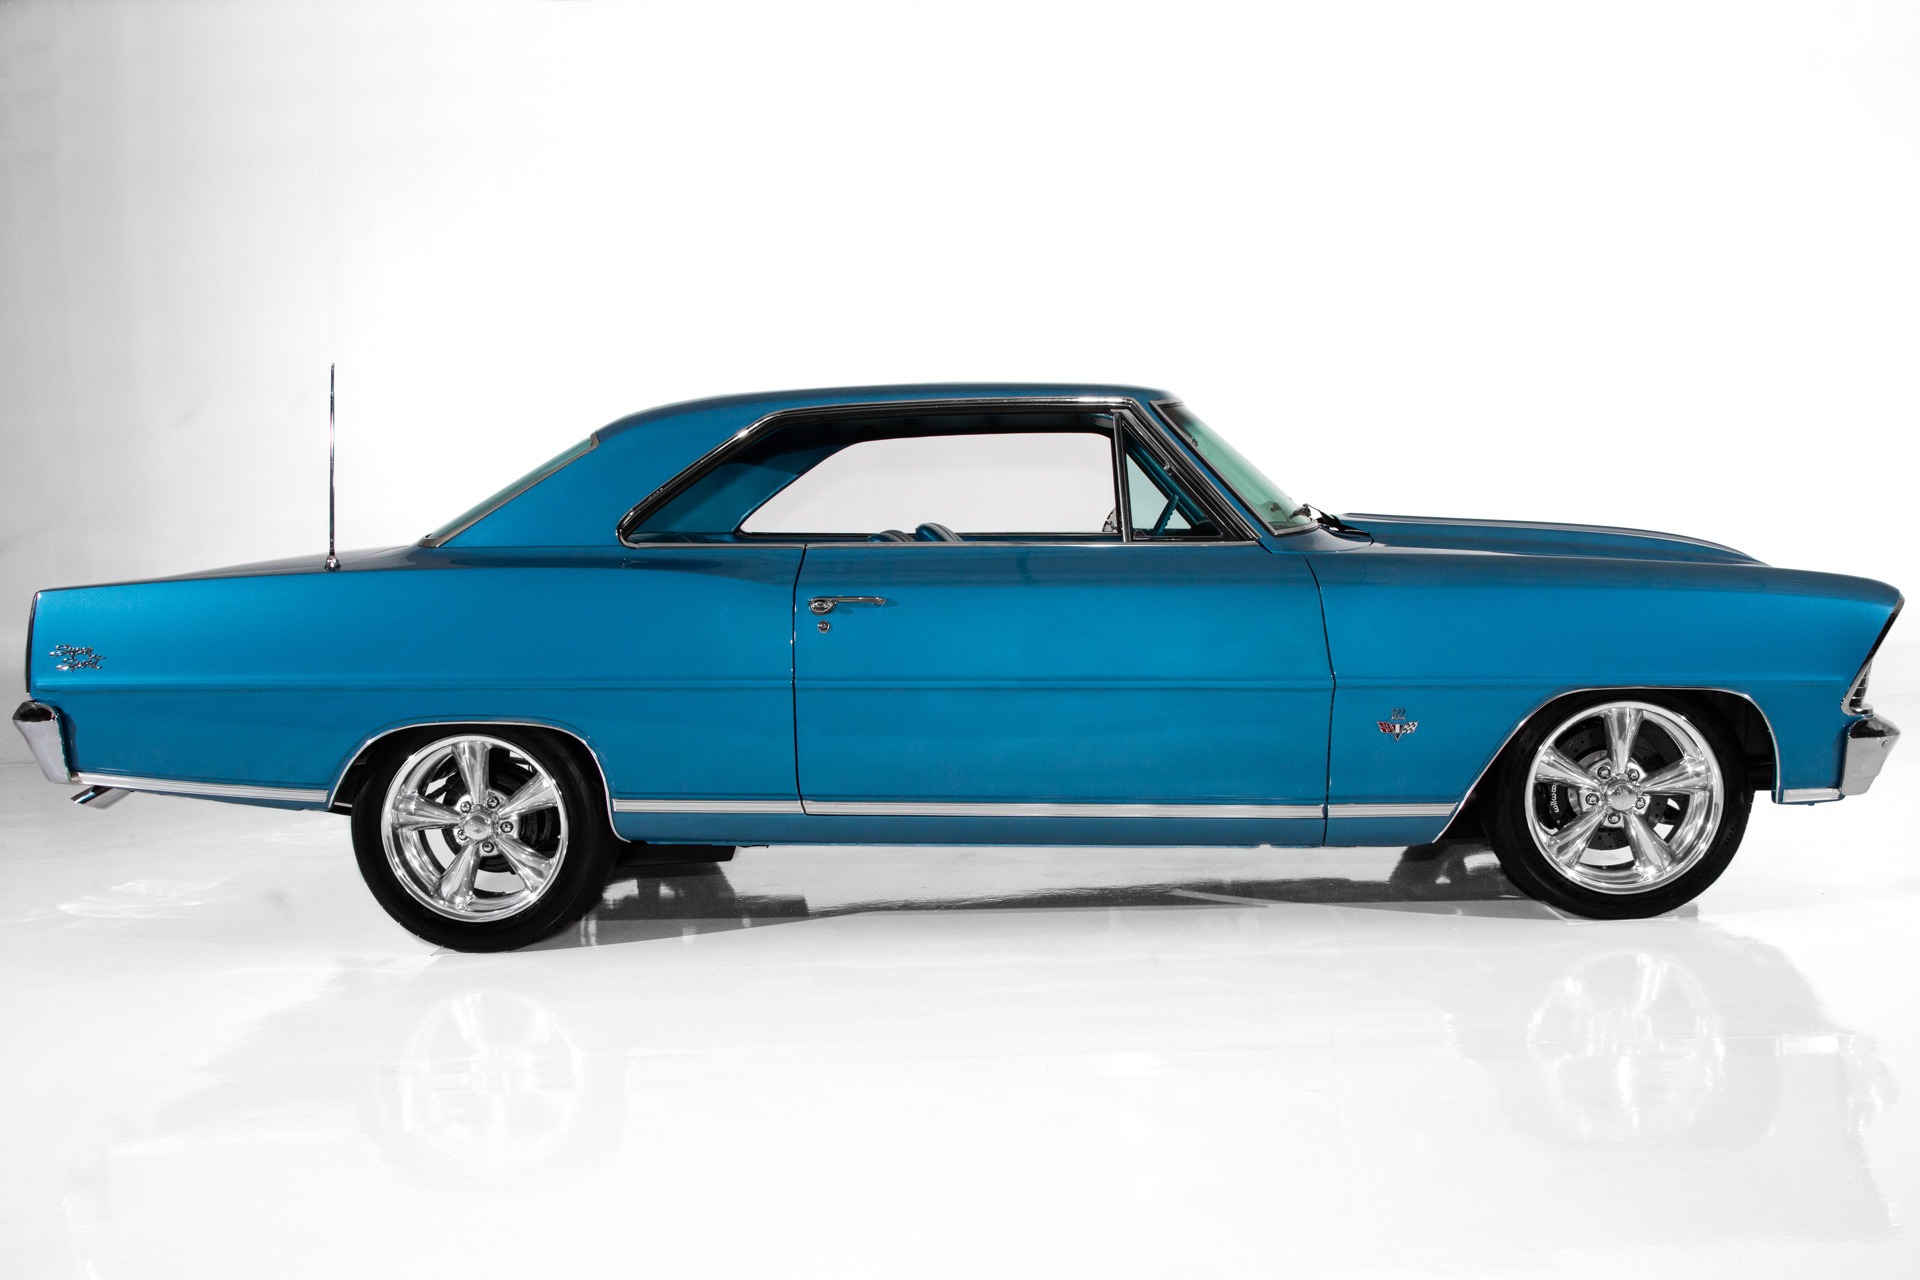 For Sale Used 1967 Chevrolet Nova Real SS, 118 vin, Built 350 Auto, AC | American Dream Machines Des Moines IA 50309